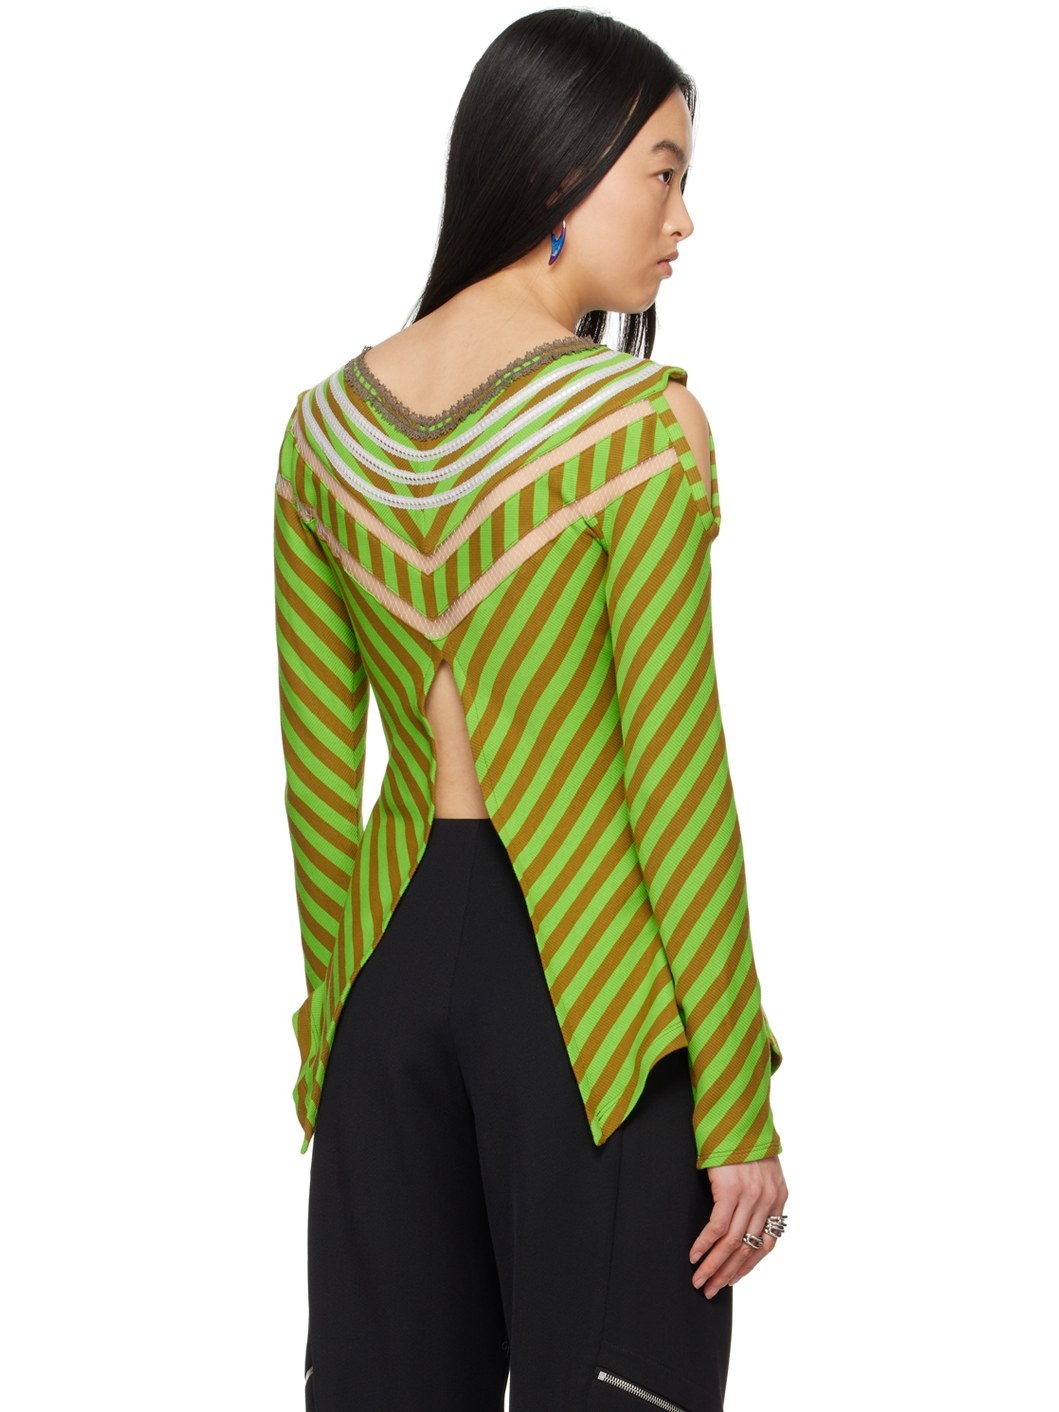 Green Panoply Top - 3